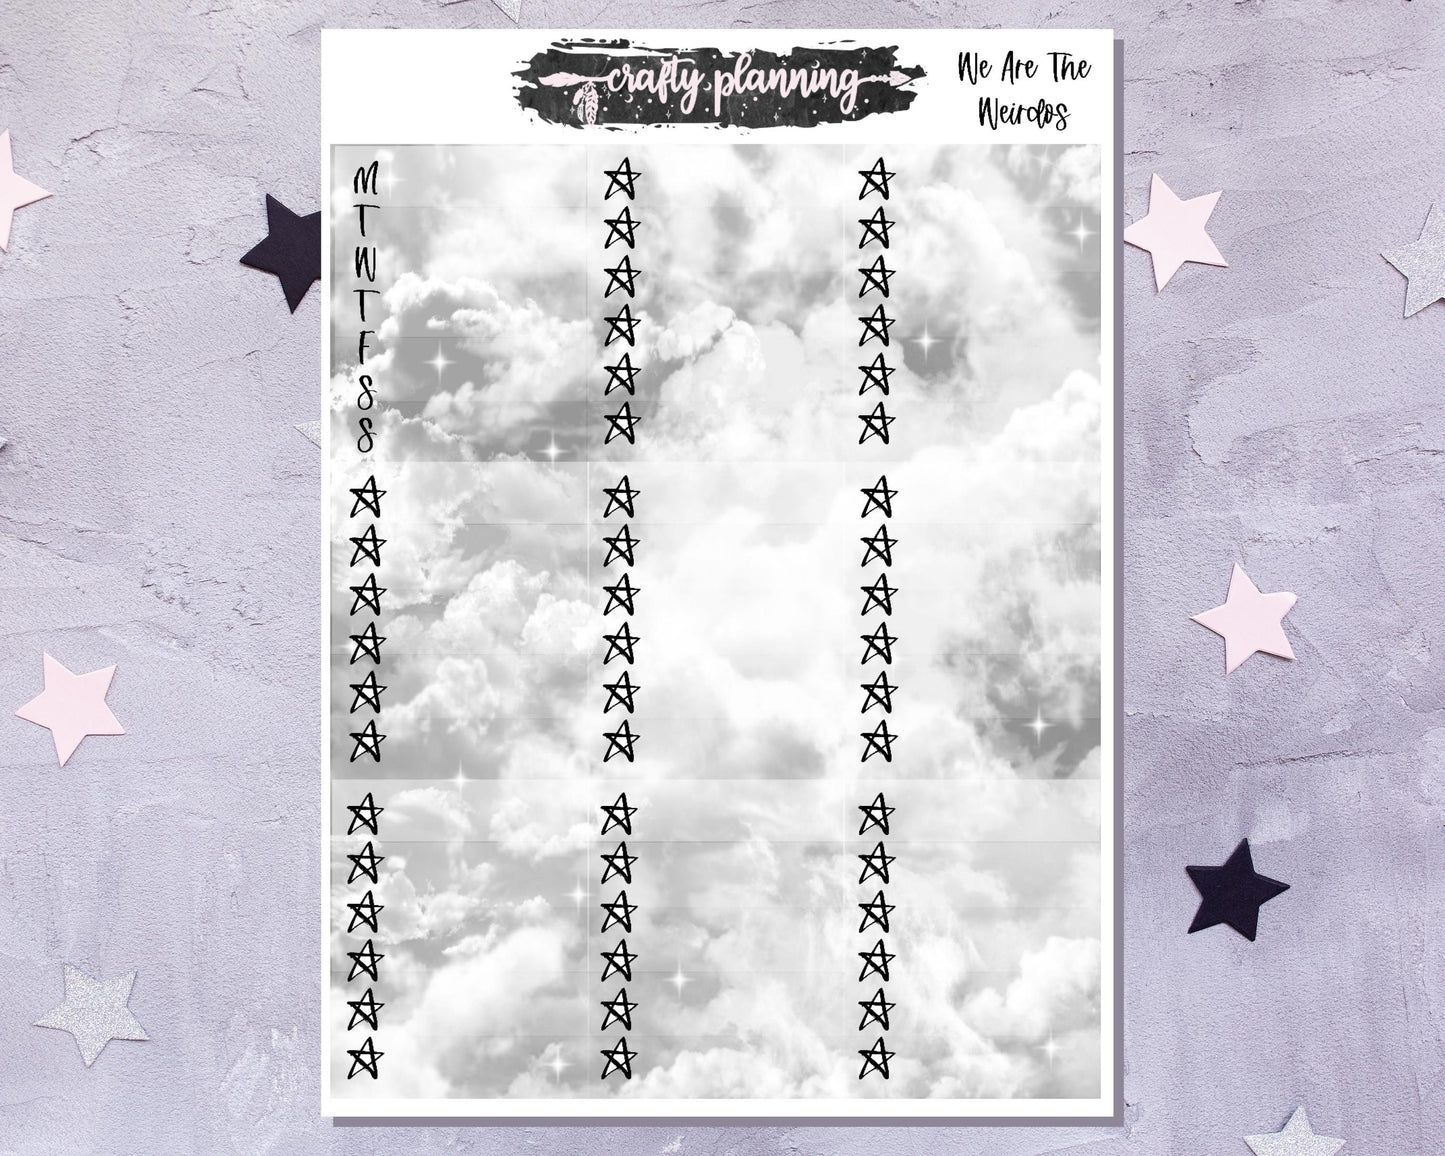 Witchcraft Stickers, Witchcraft Planner Kit, Weekly Vertical Planner, Witchcraft Stickers, Gothic Stickers, Halloween Stickers, Esoteric